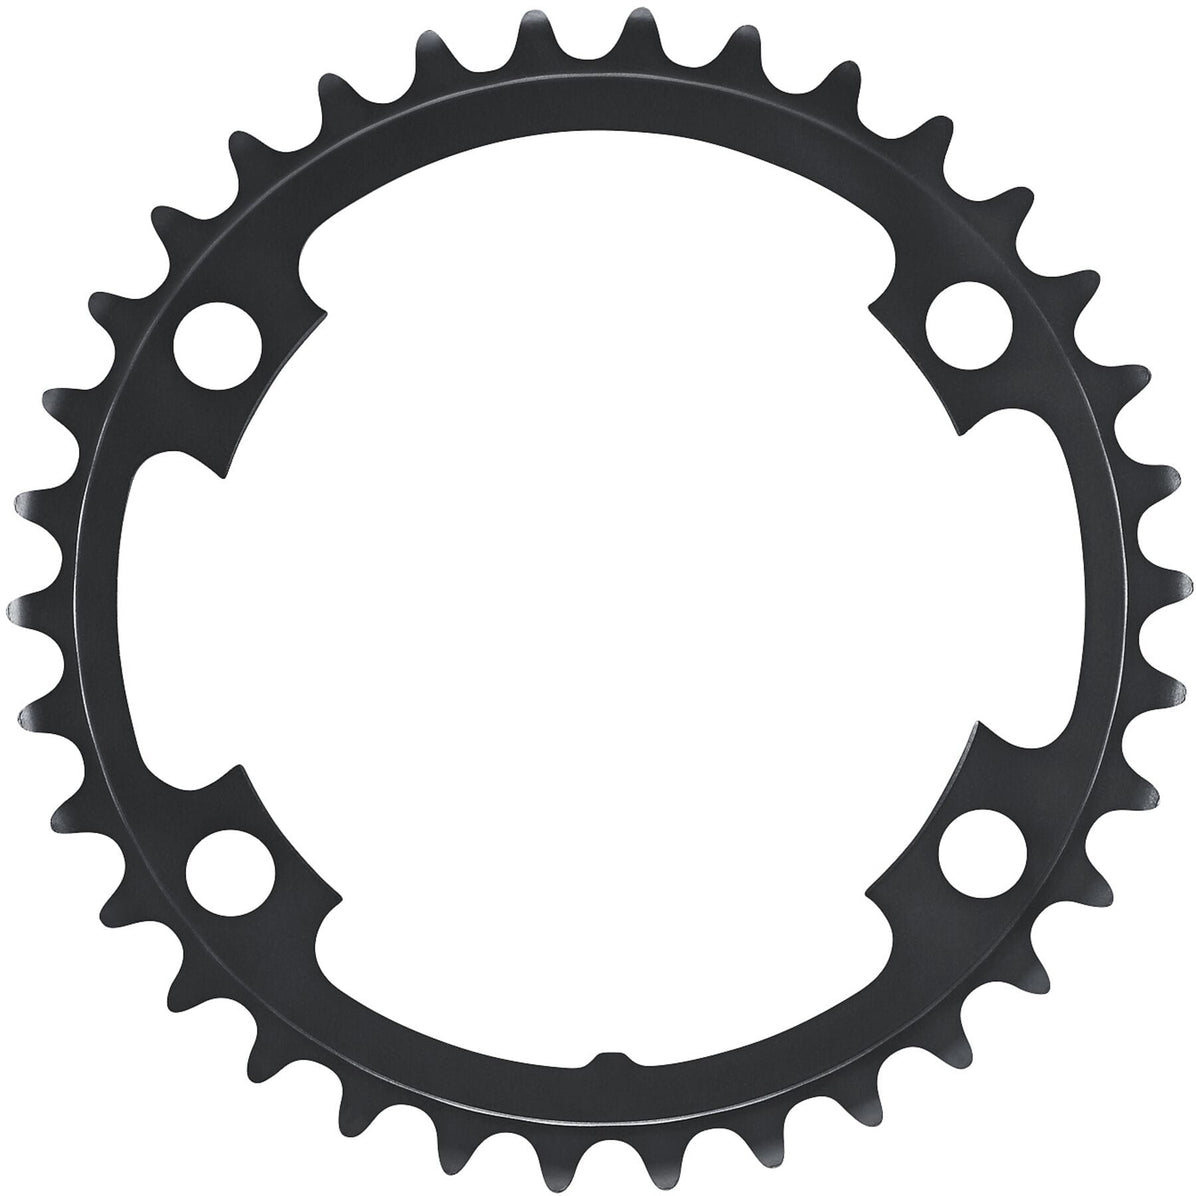 Shimano FC-6800 chainring 34T-MA for 50-34T